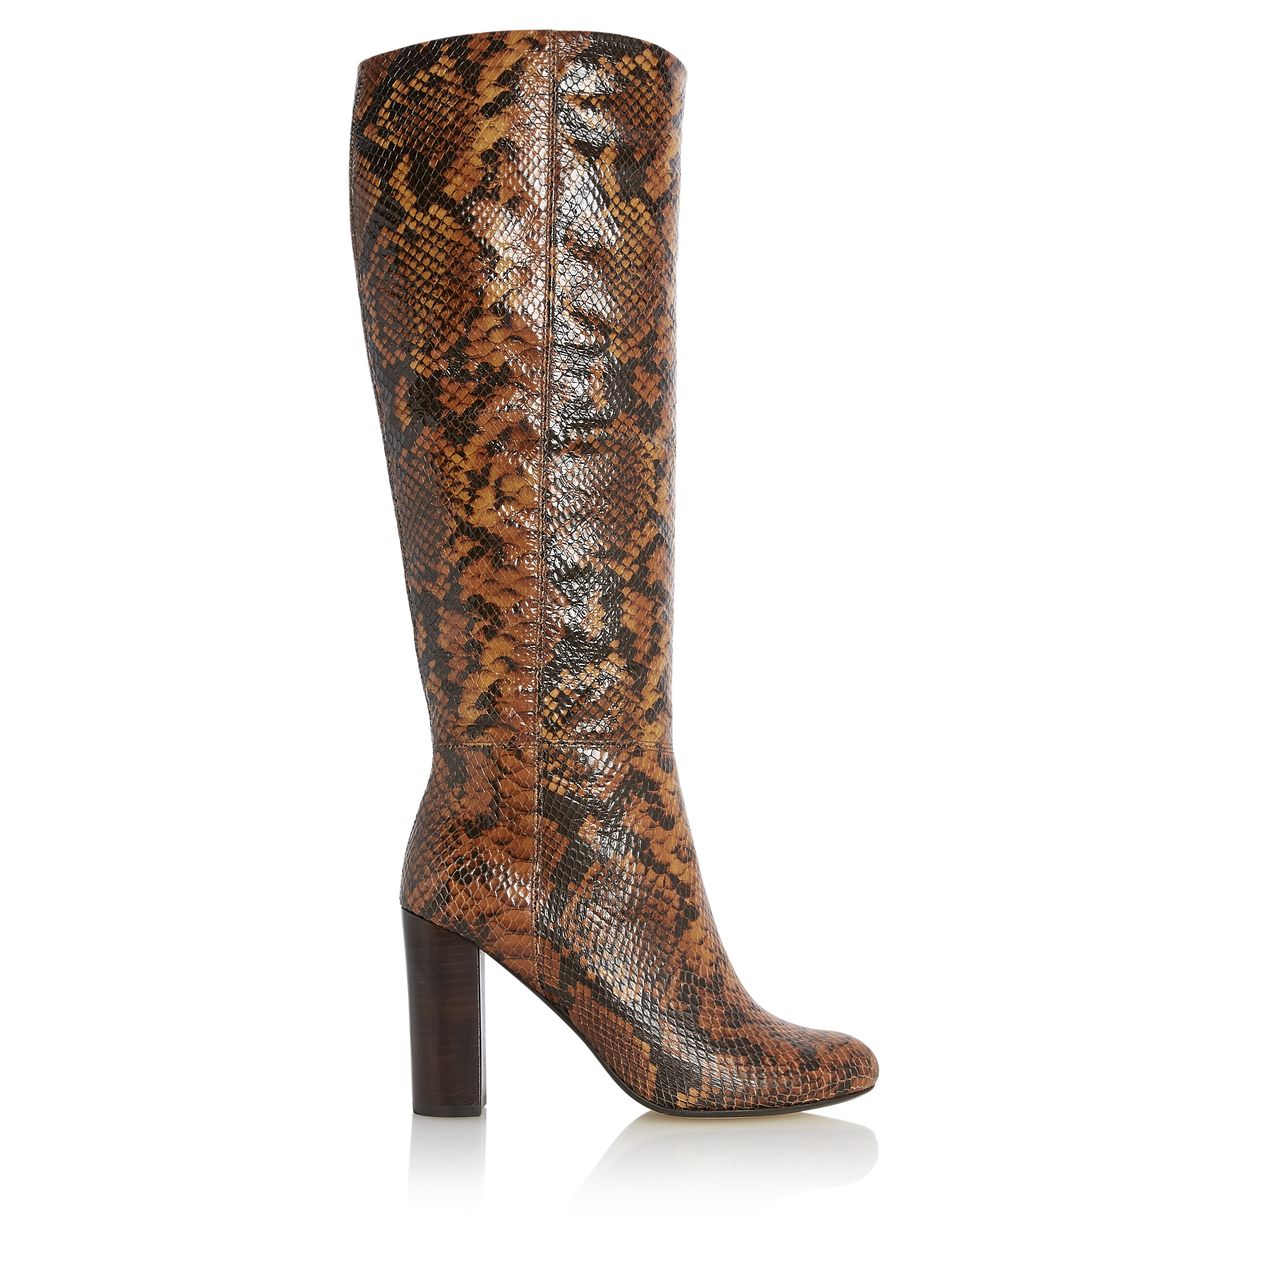 Dune London’s bestselling knee high boot is back in stock | Woman & Home